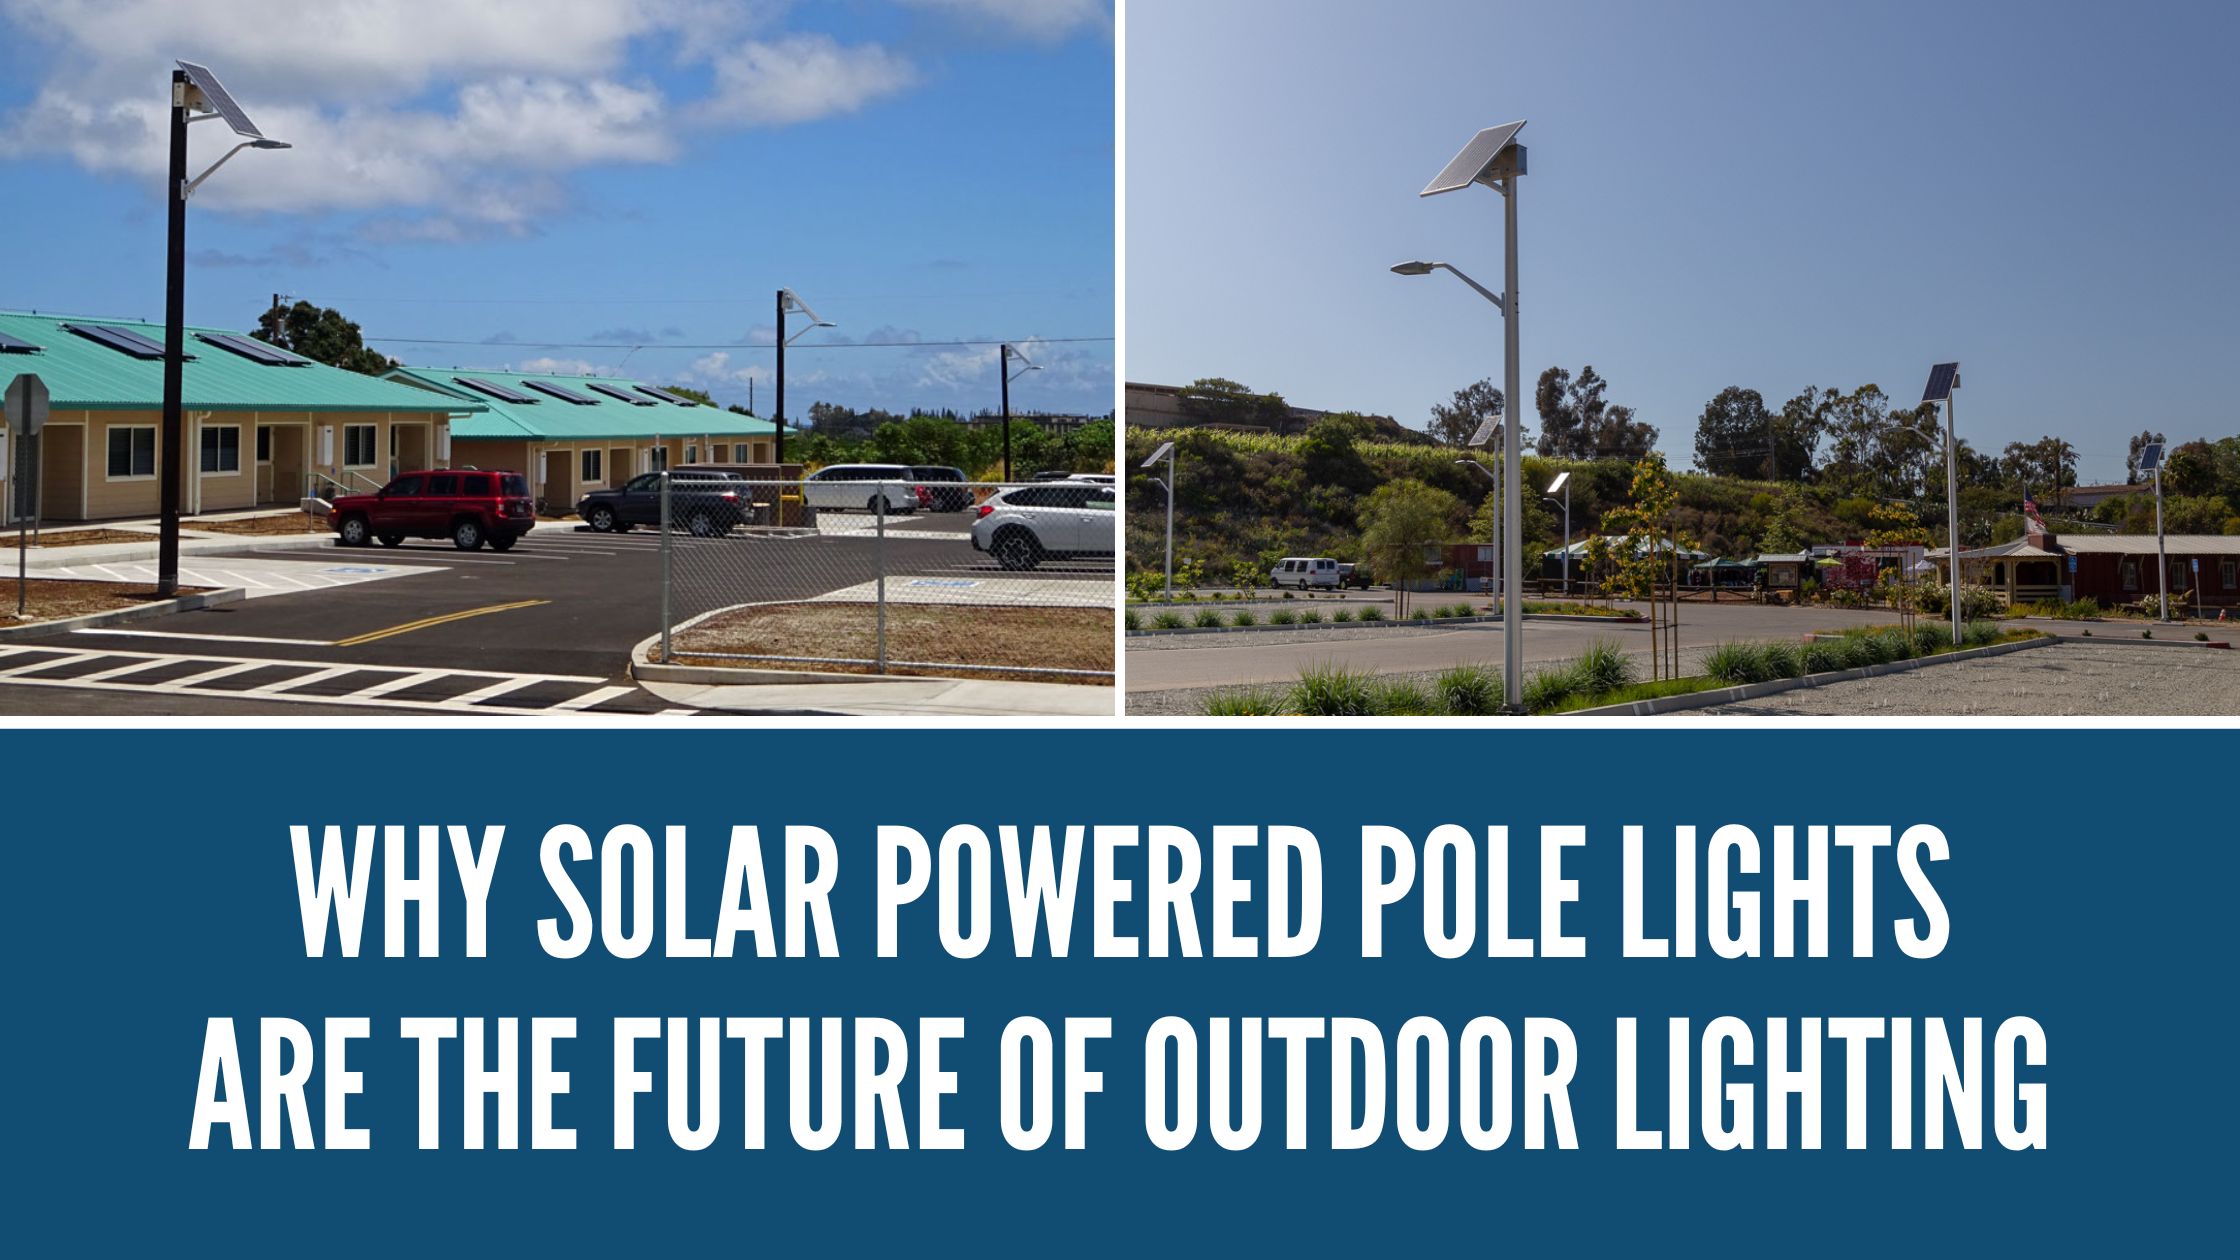 Why Solar Powered Pole Lights Are the Future of Outdoor Lighting